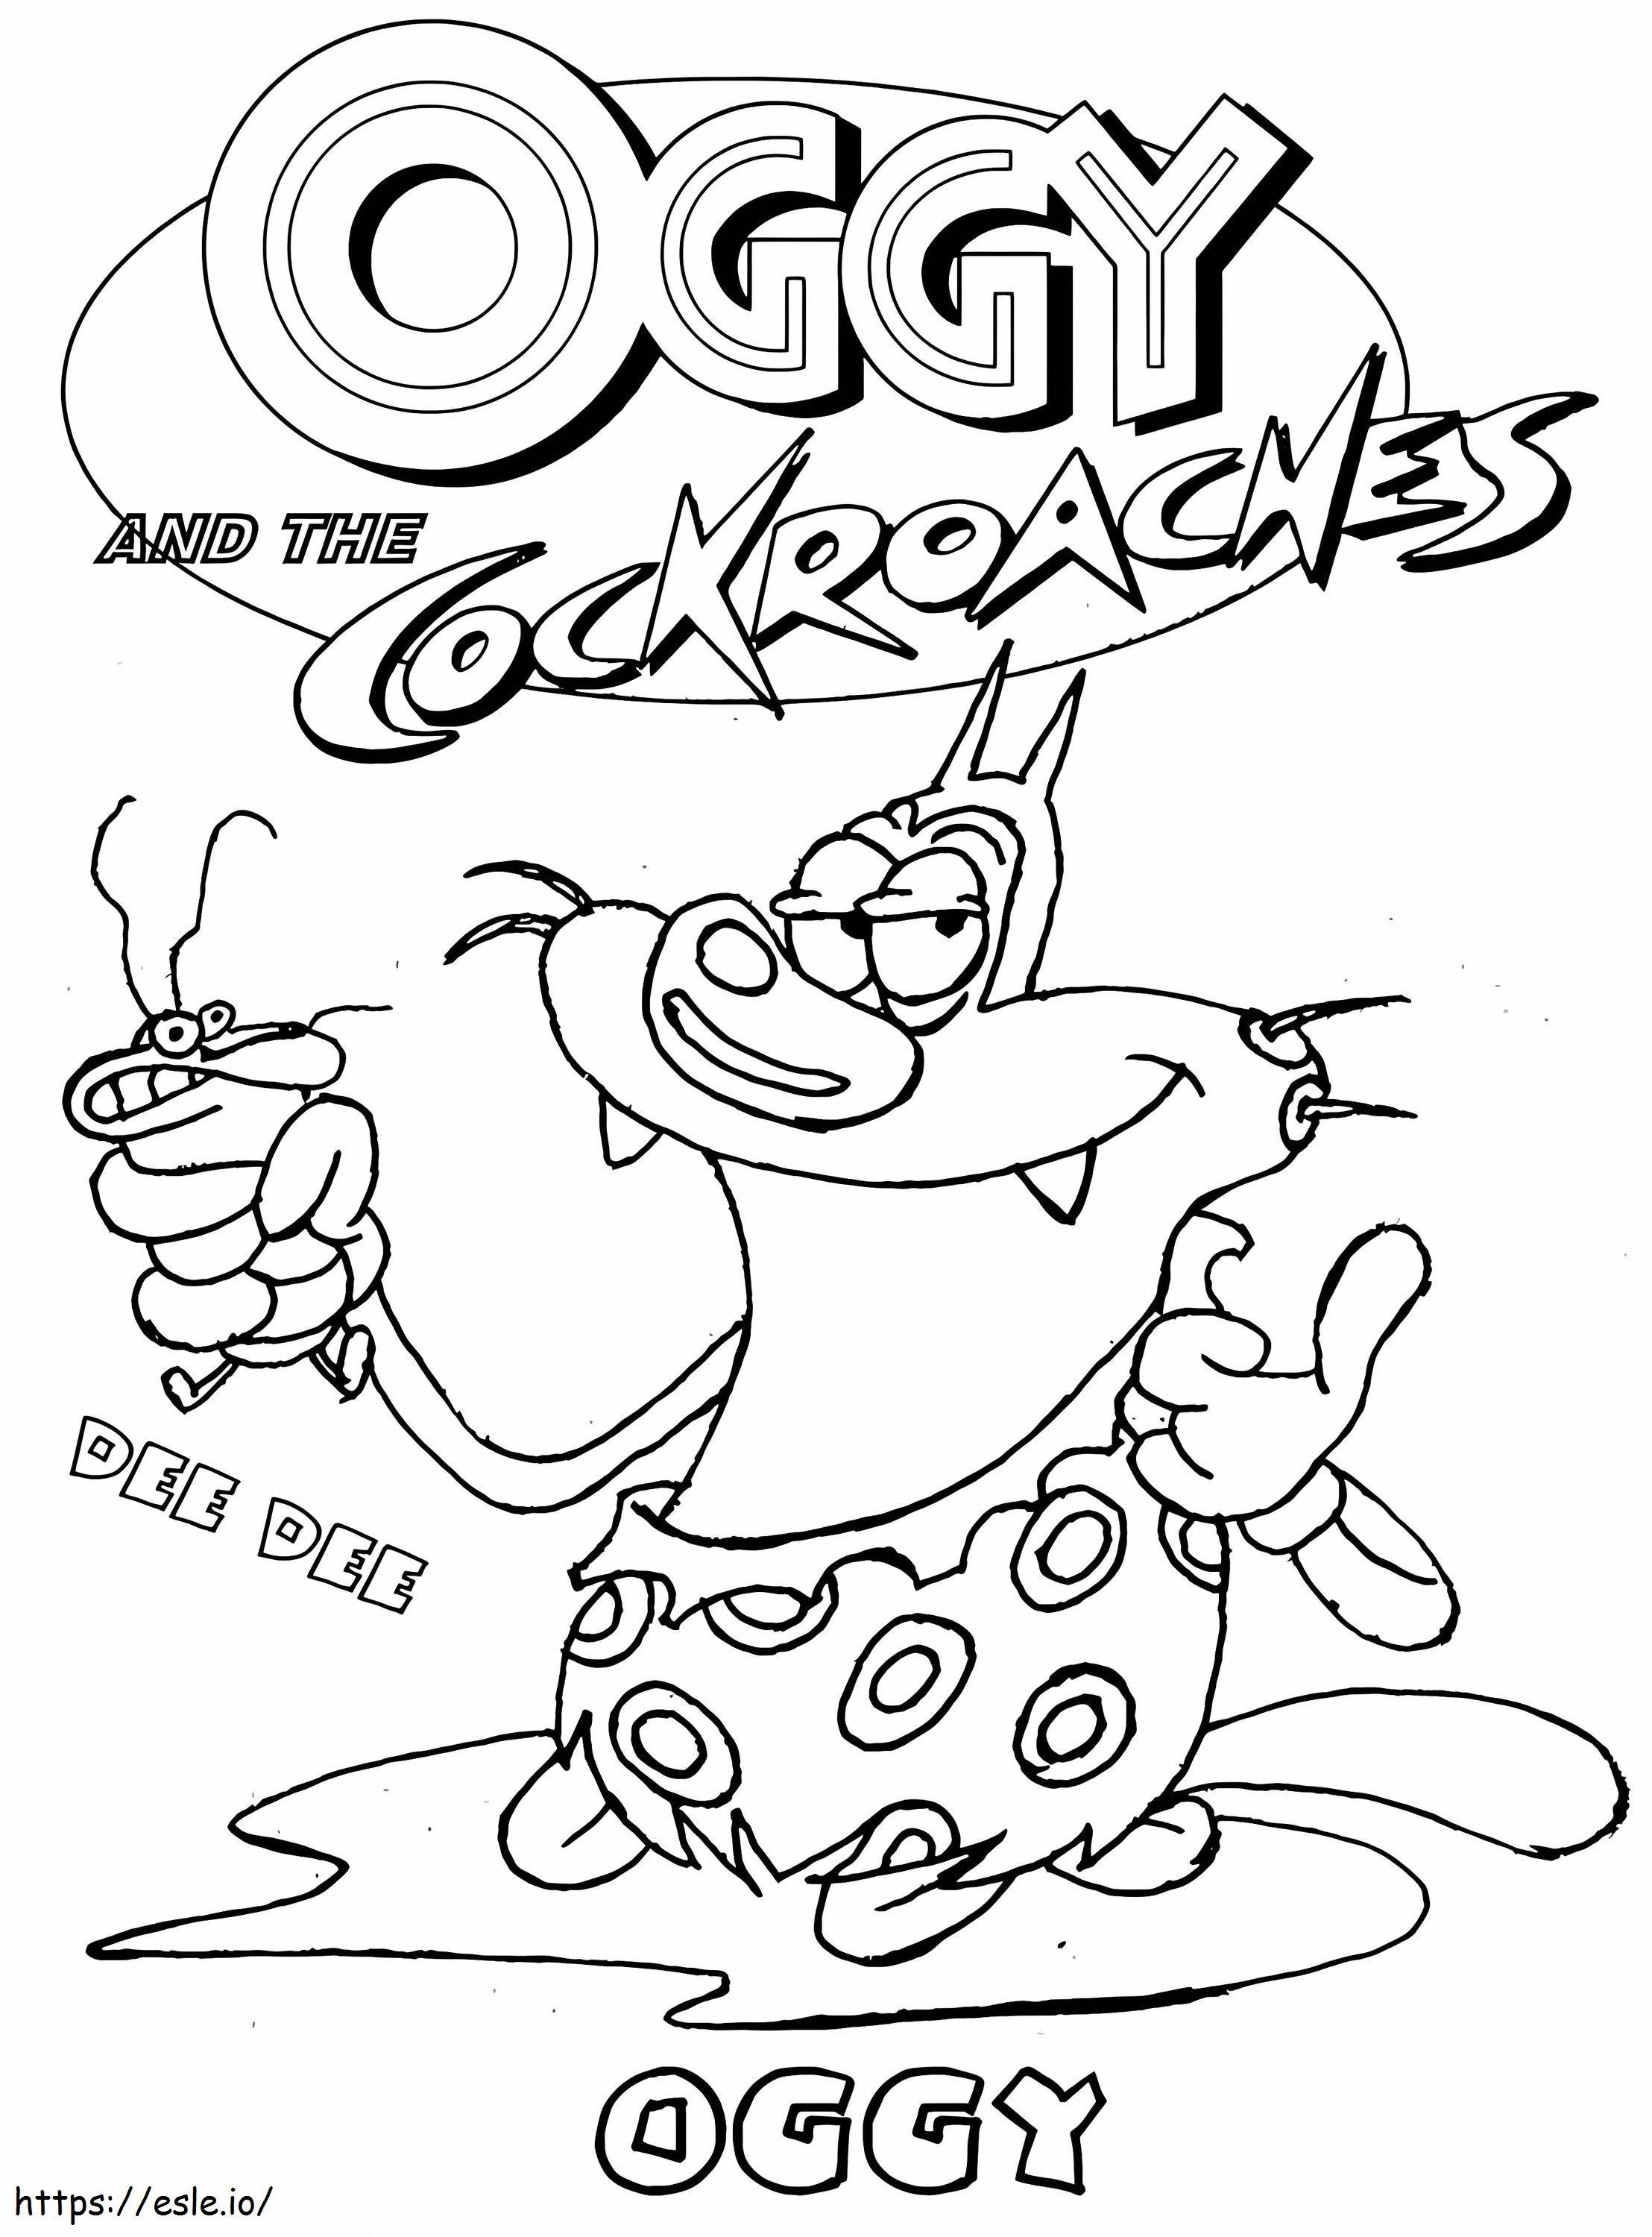 1594948010 3515 101835 Oggy Cockroaches5 coloring page